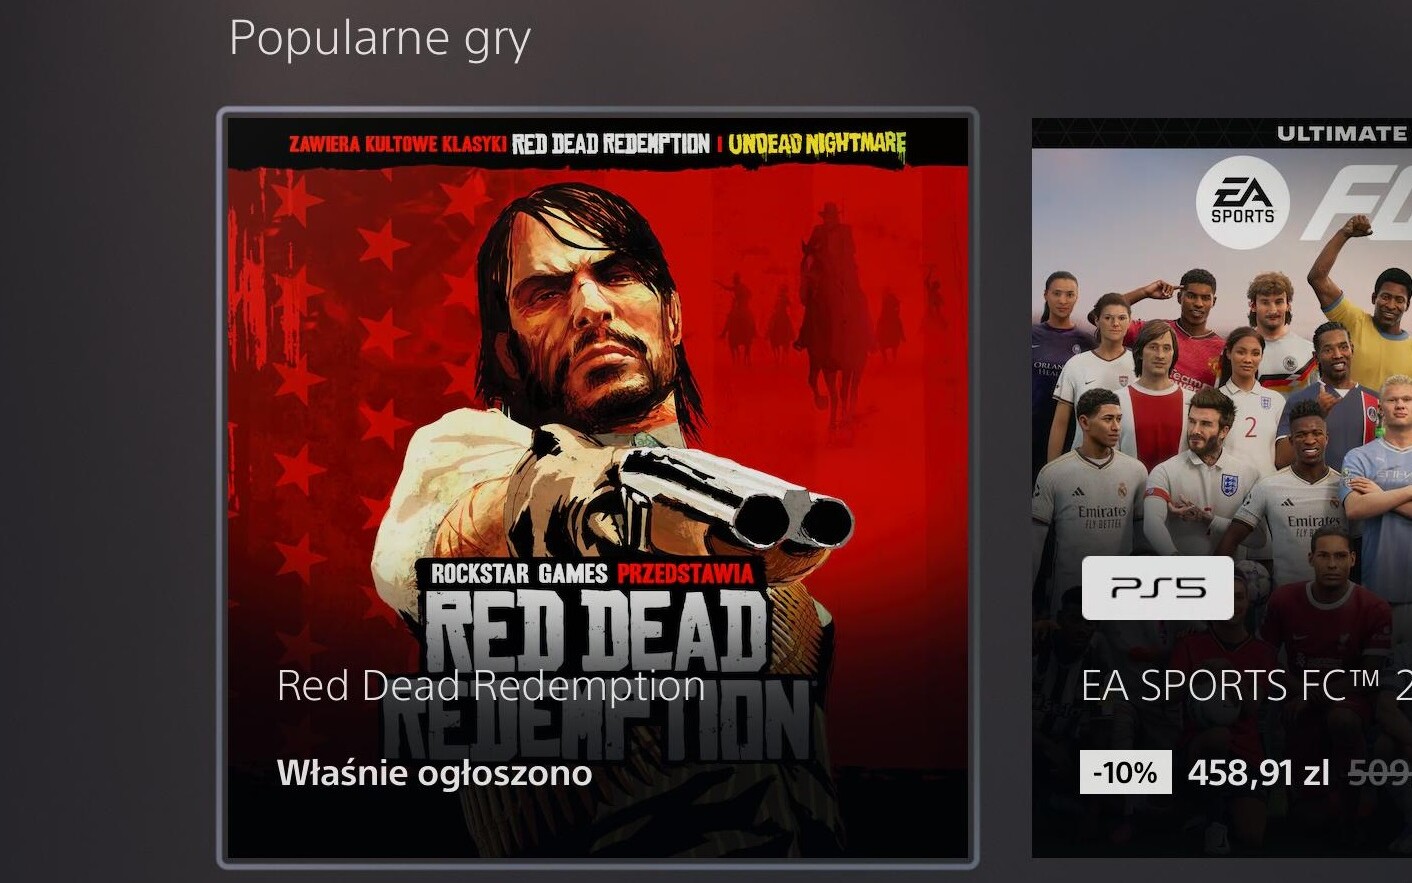 Red Dead Redemption na PlayStation Store